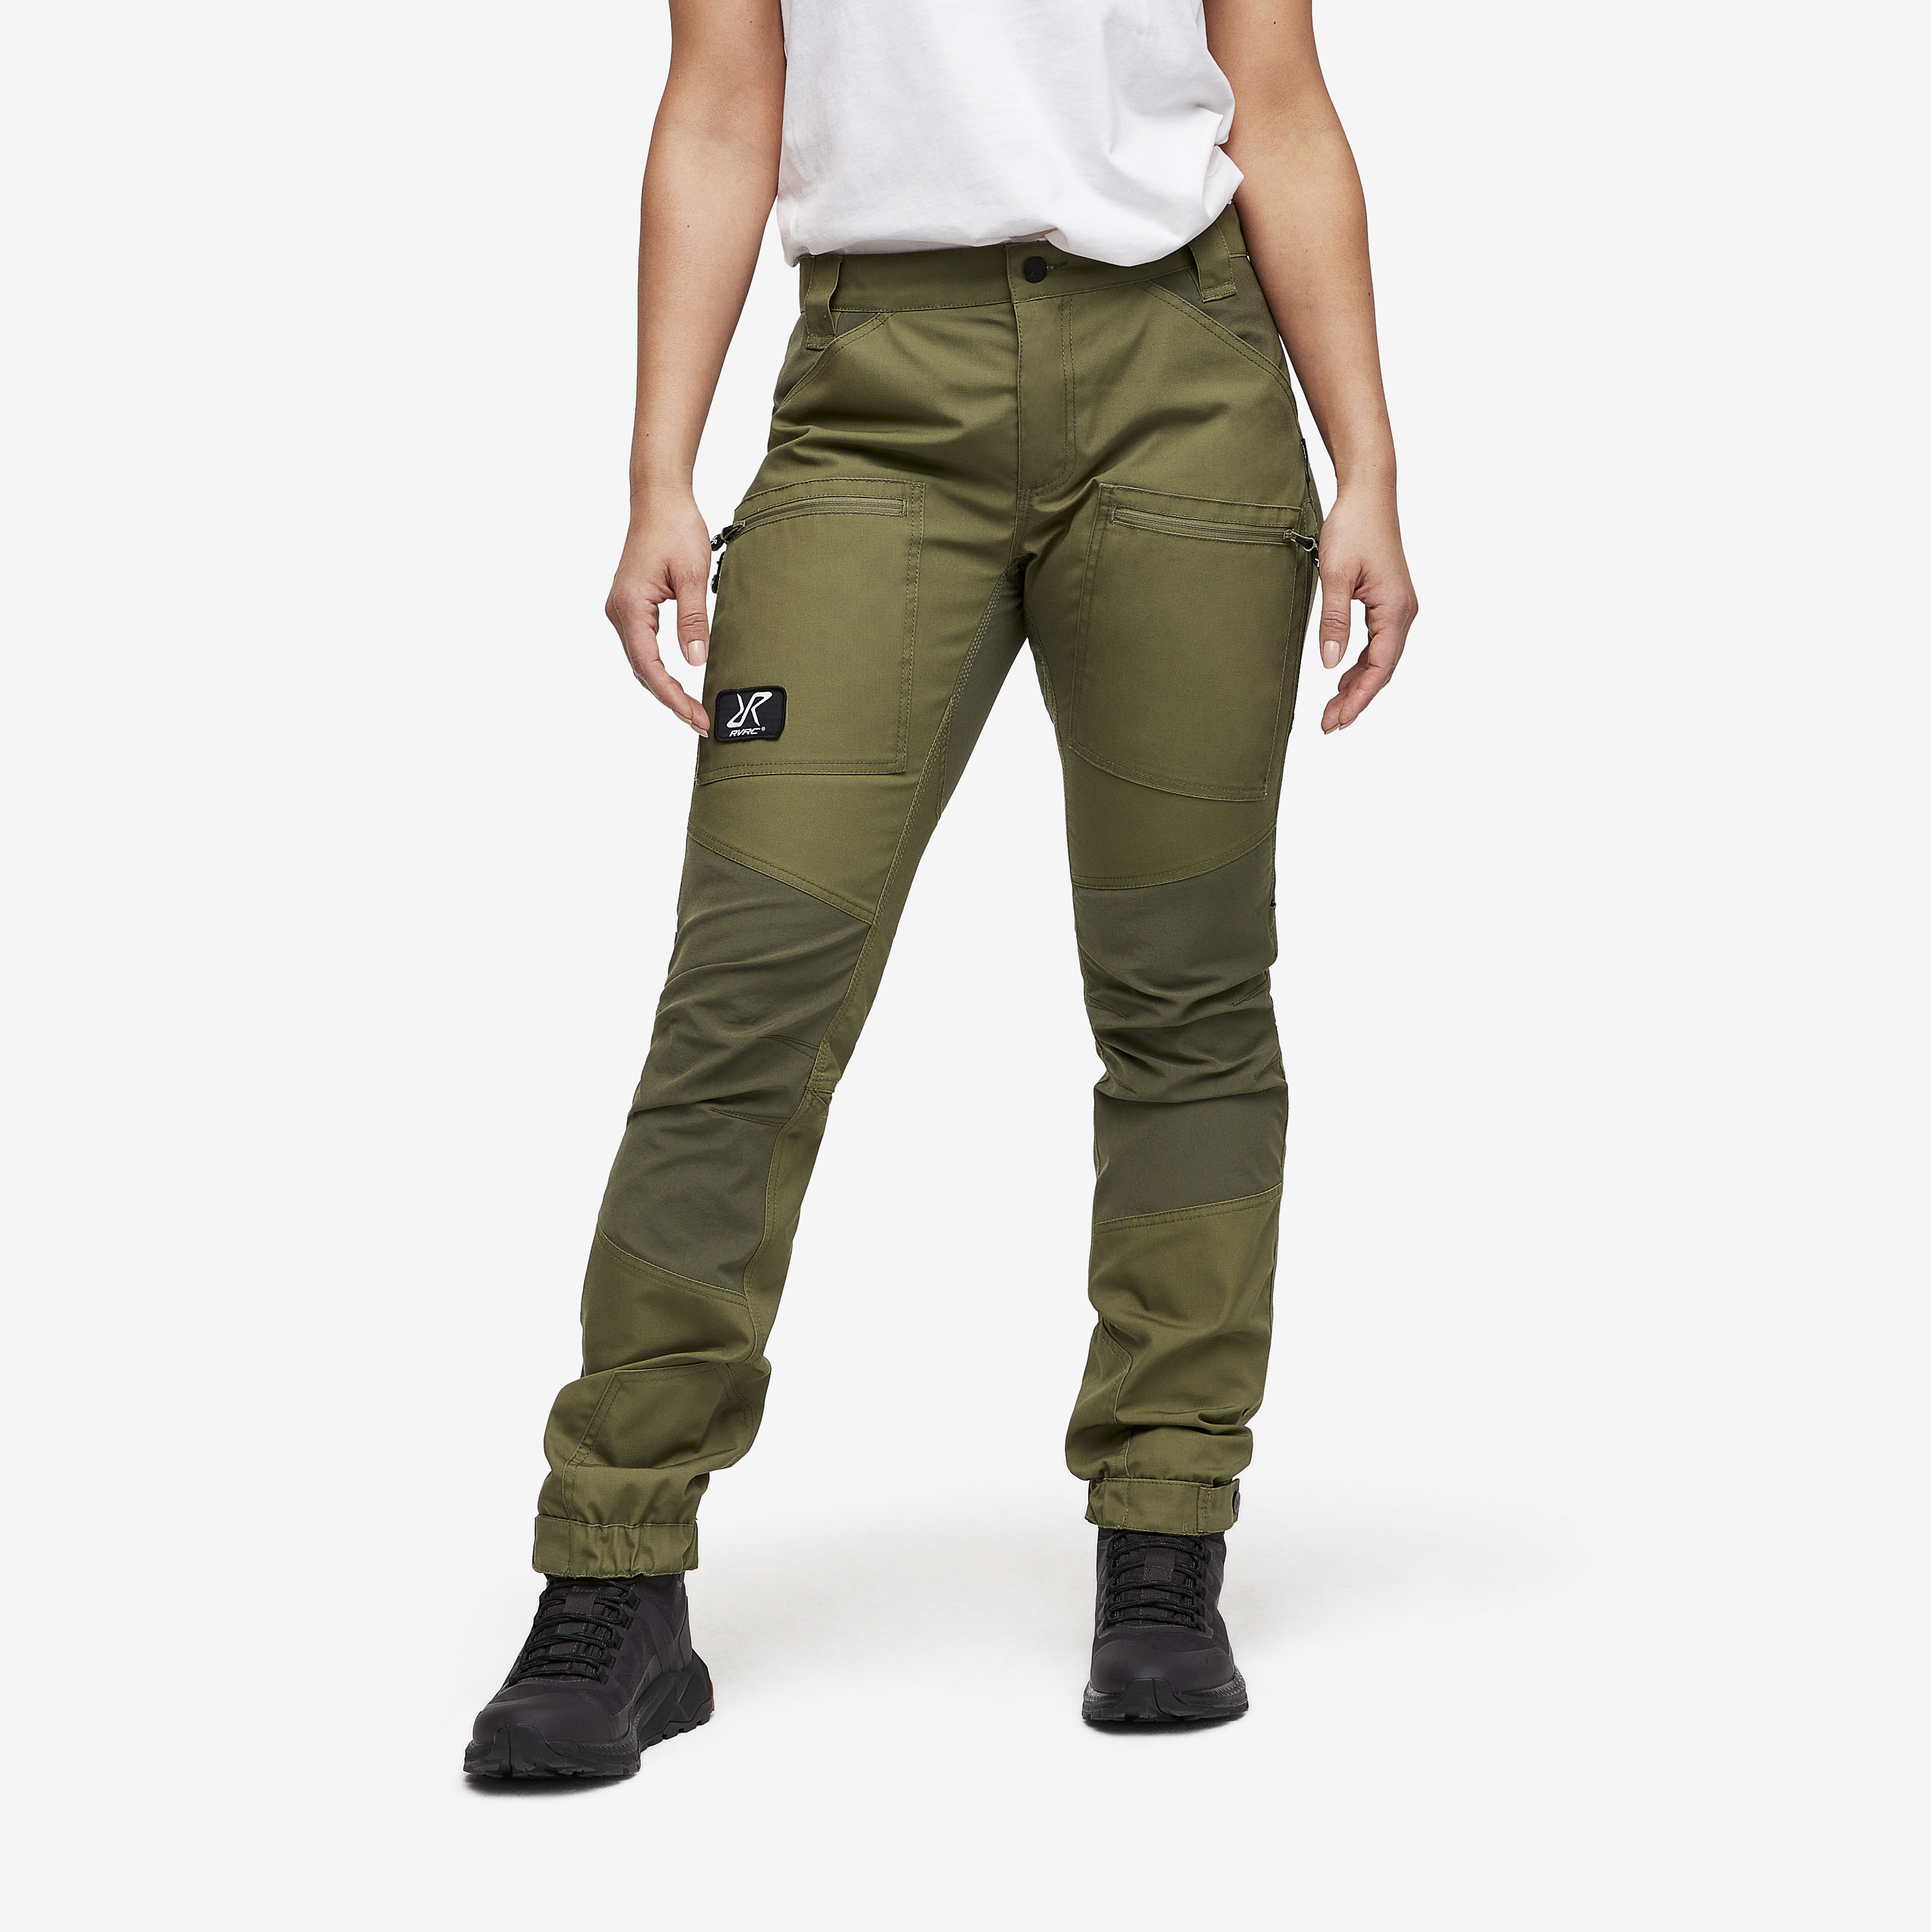 Nordwand Pro Pants Burnt Olive Mujeres